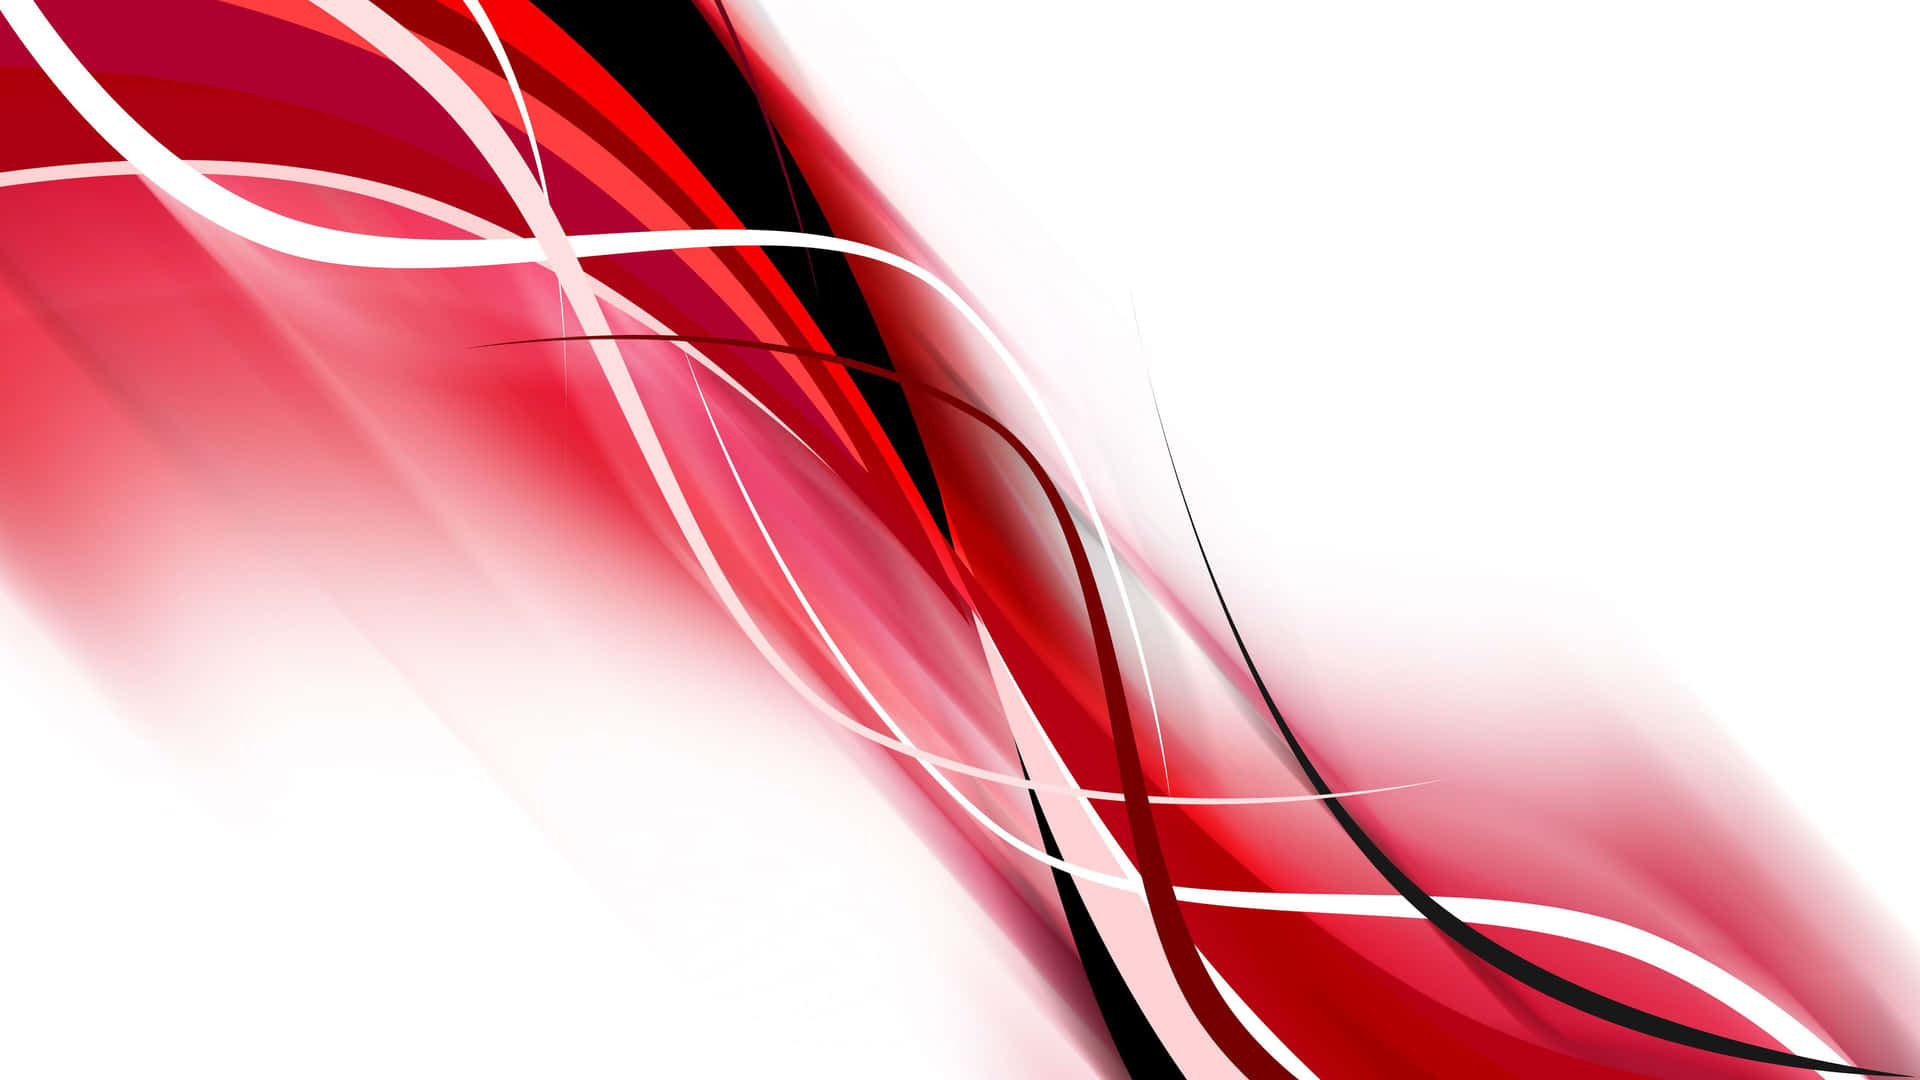 hd backgrounds red and white